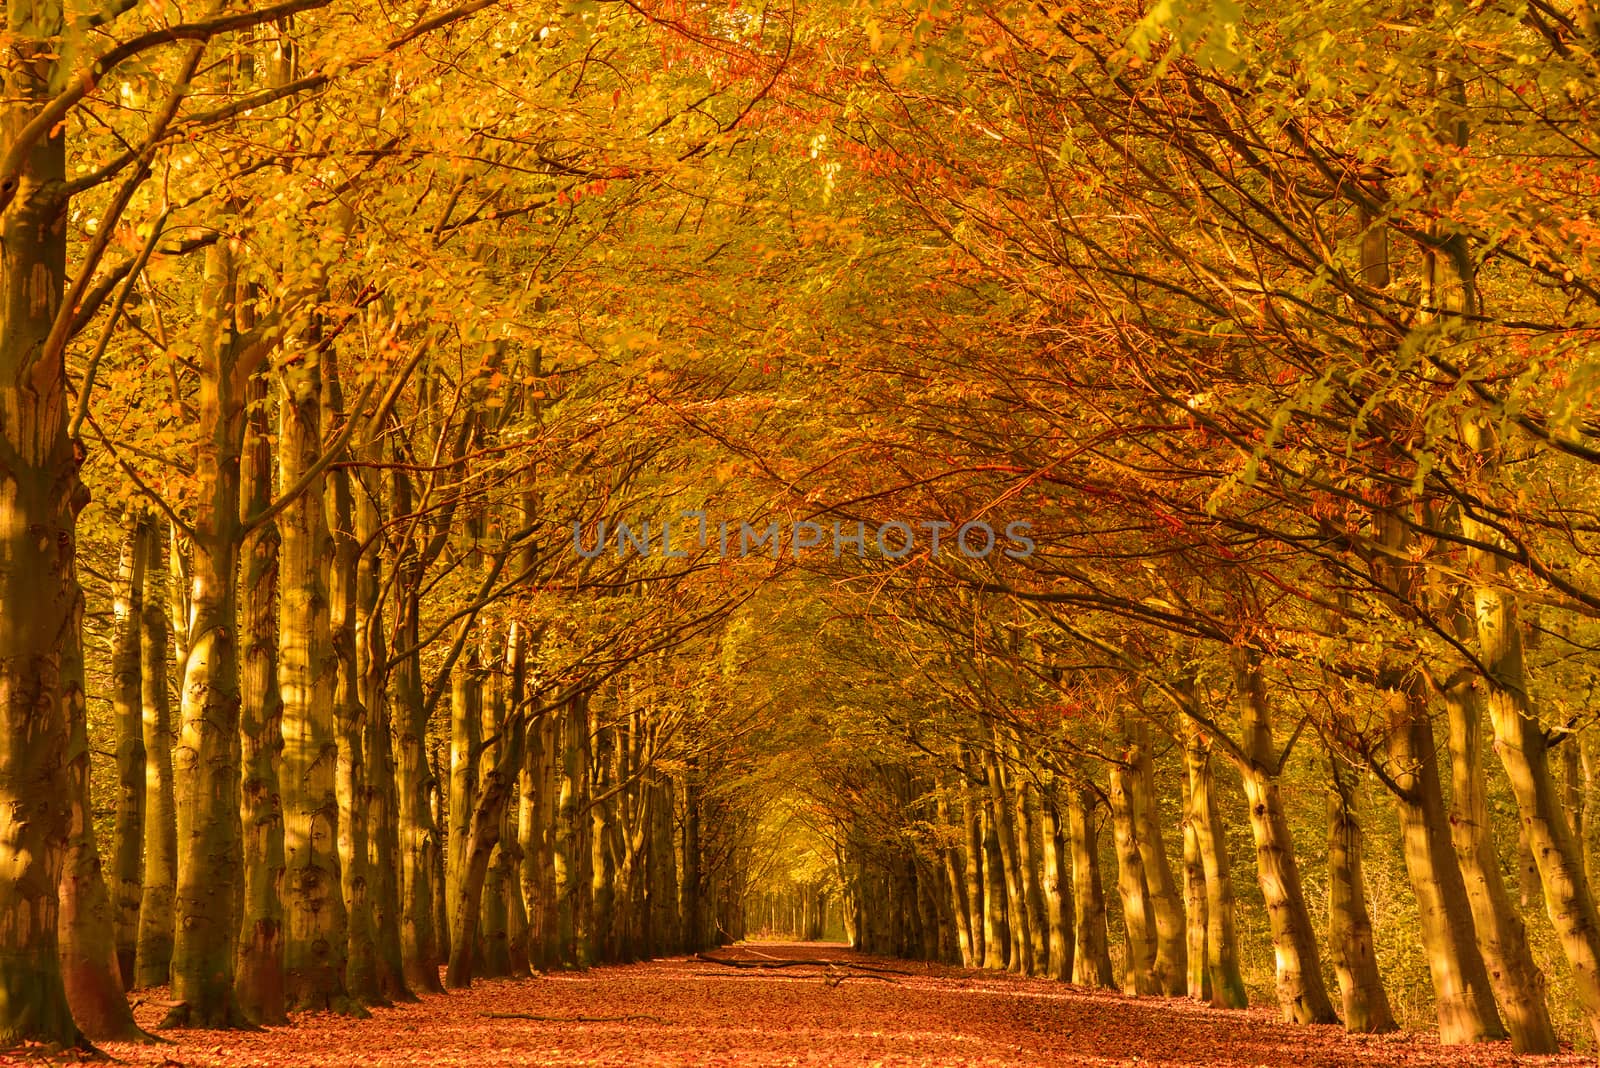 Lane through the beech trees in a forest in autumn colors with fallen leaves on the ground.